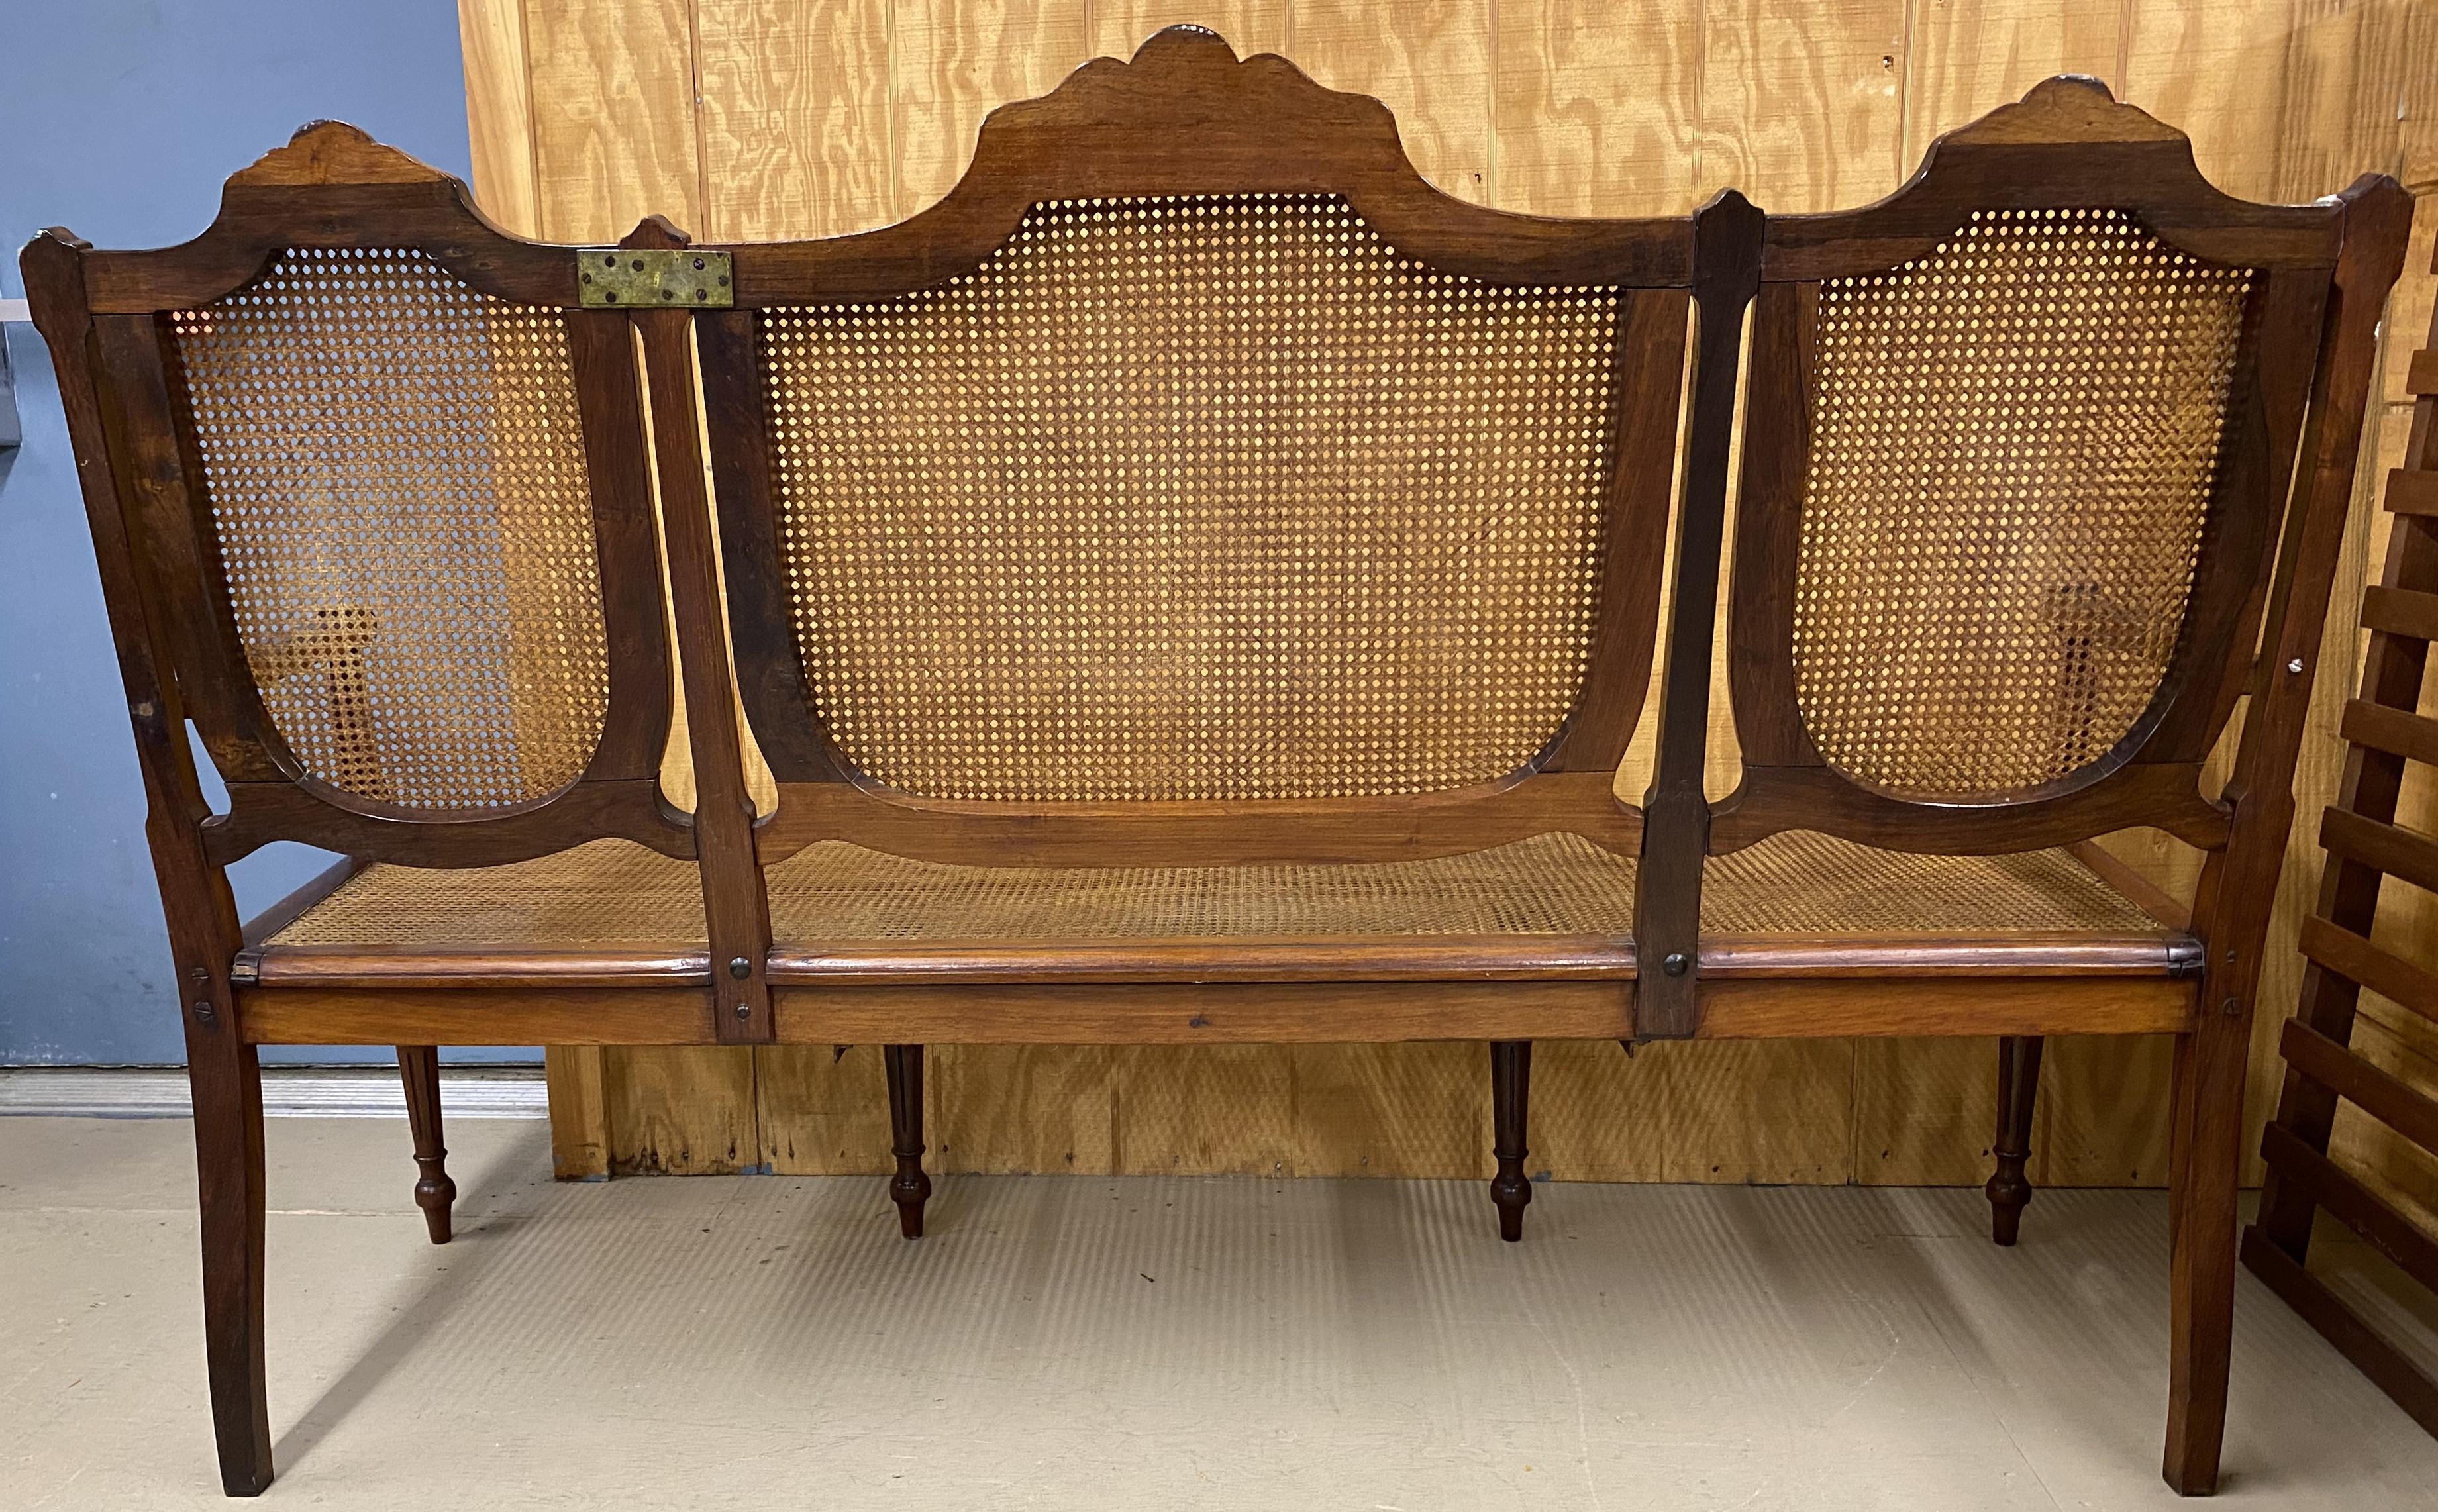 19th c Brazilian Hardwood Settee with Caned Seat and Back For Sale 4